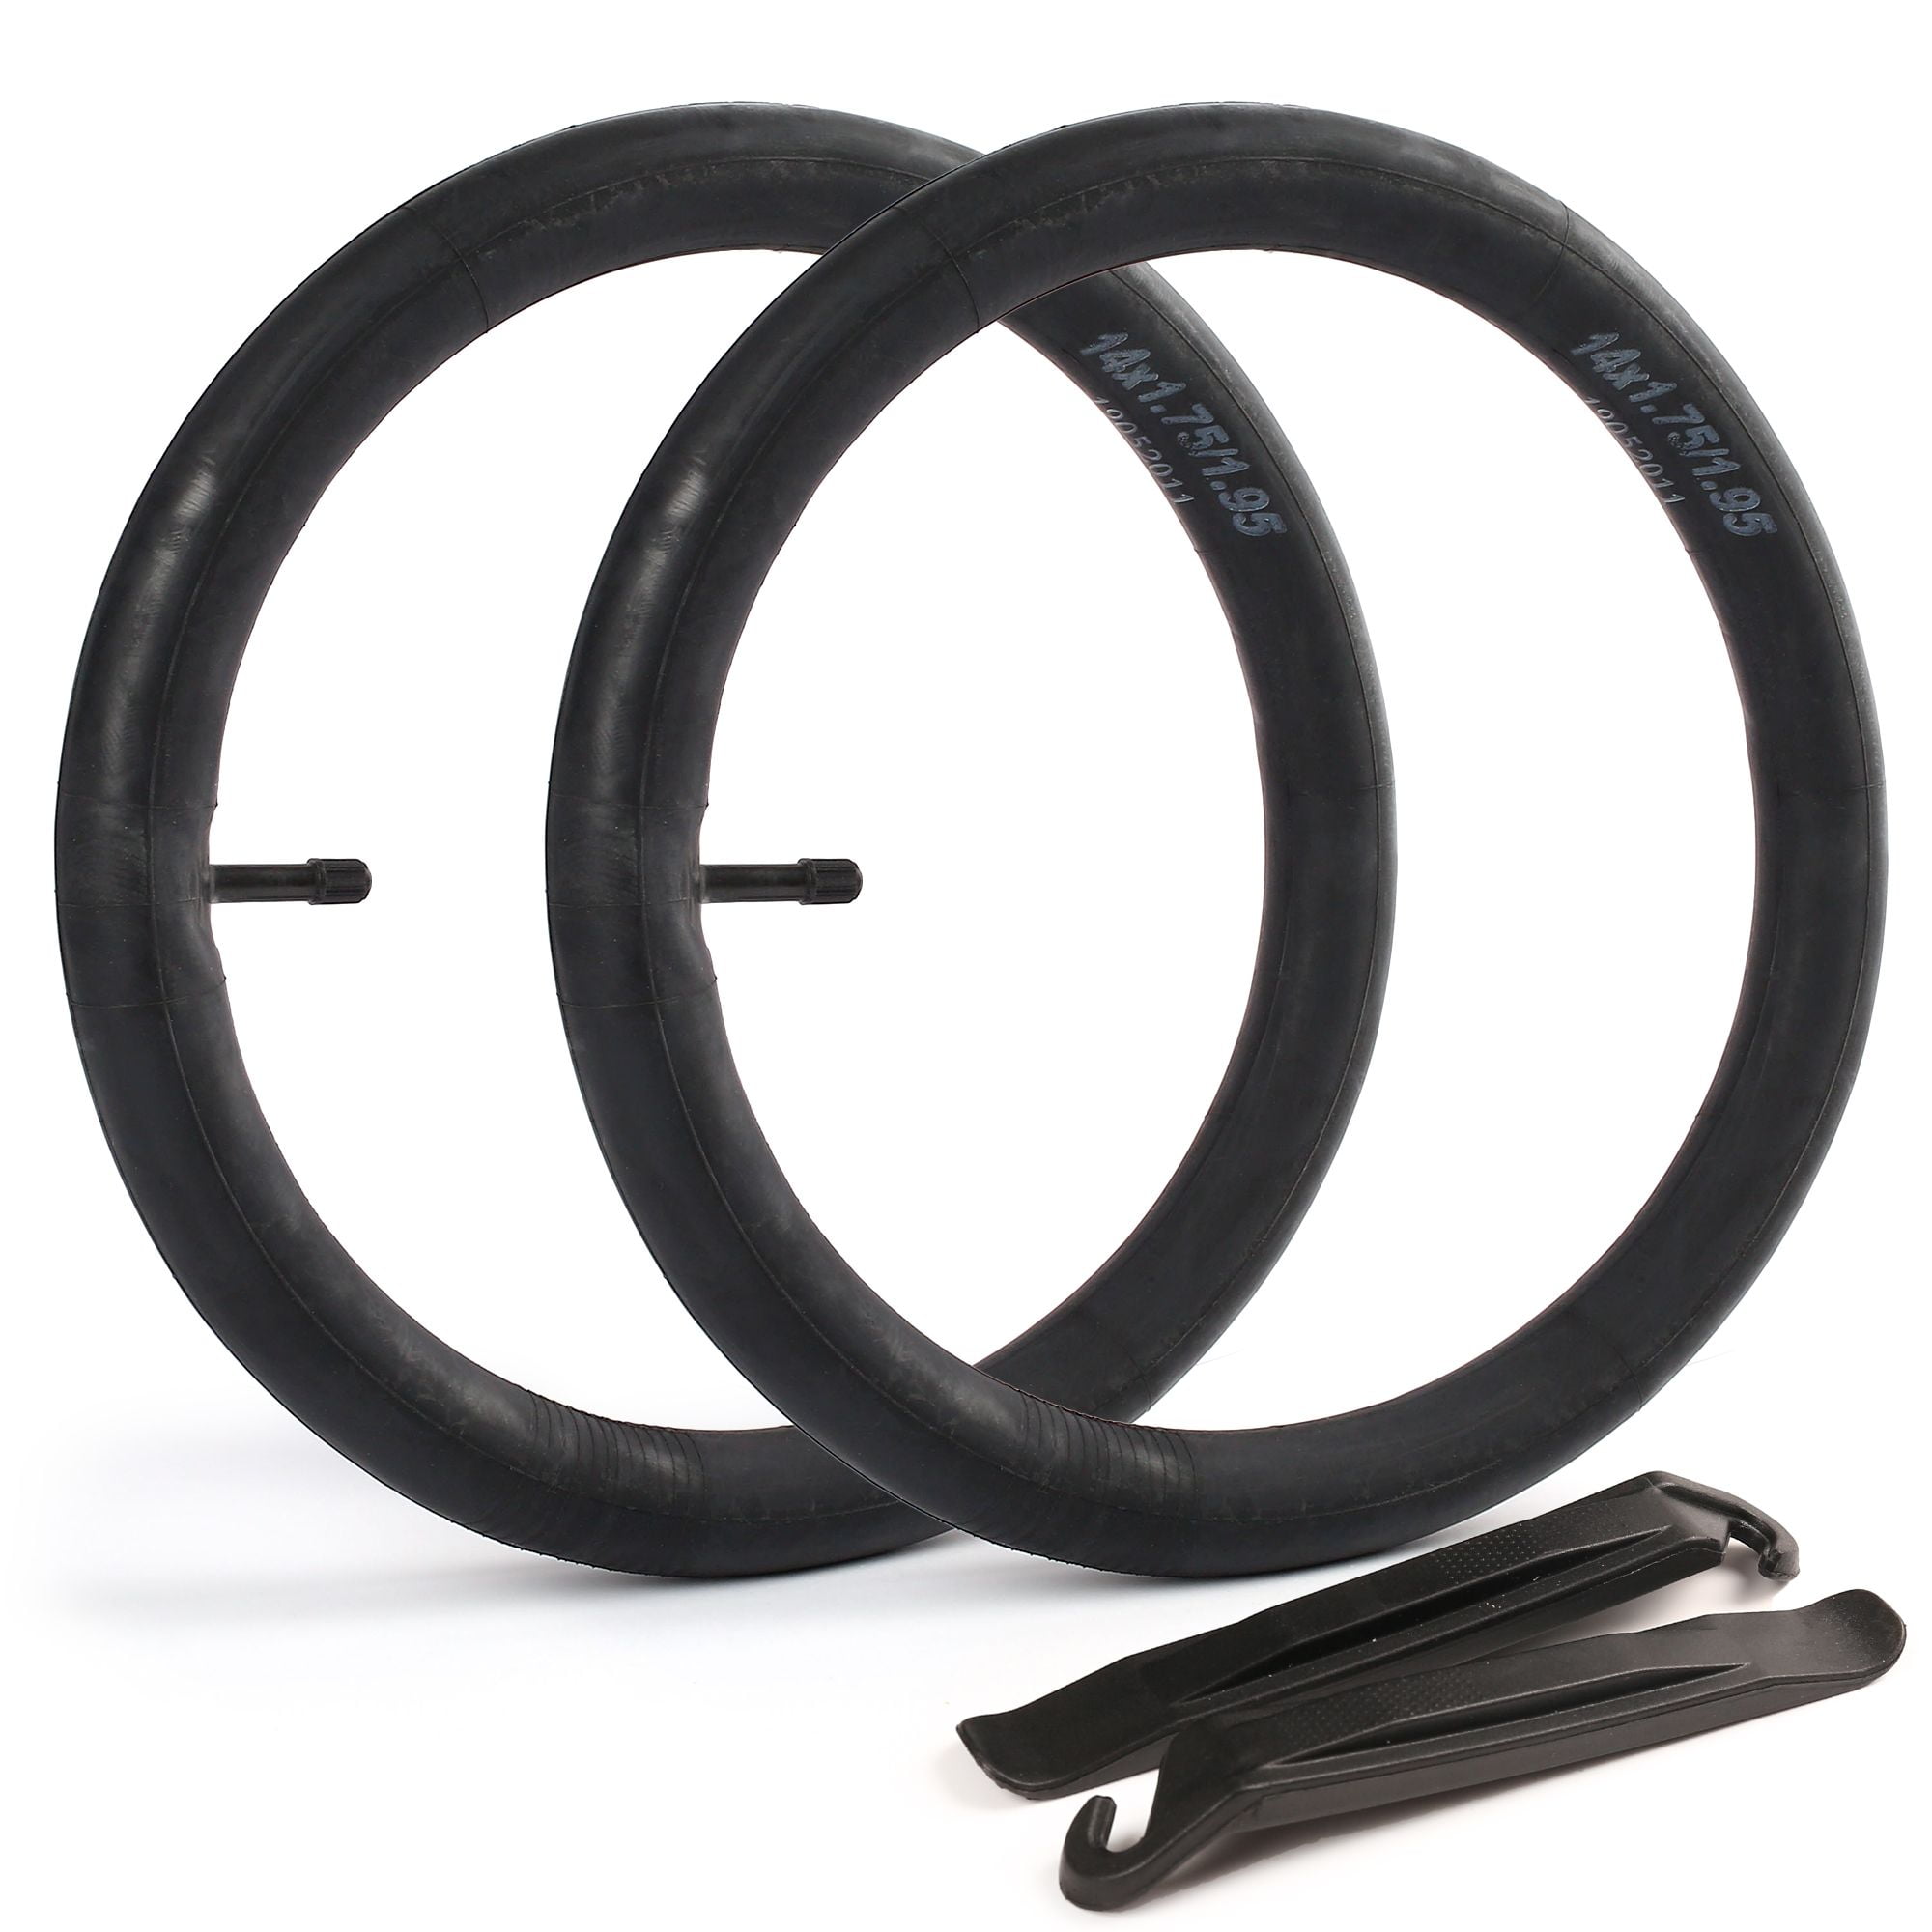 26" Bike Tube Bicycle Tire Inner Interior Rubber Size 24 x 1.75-2.125 Schrader 